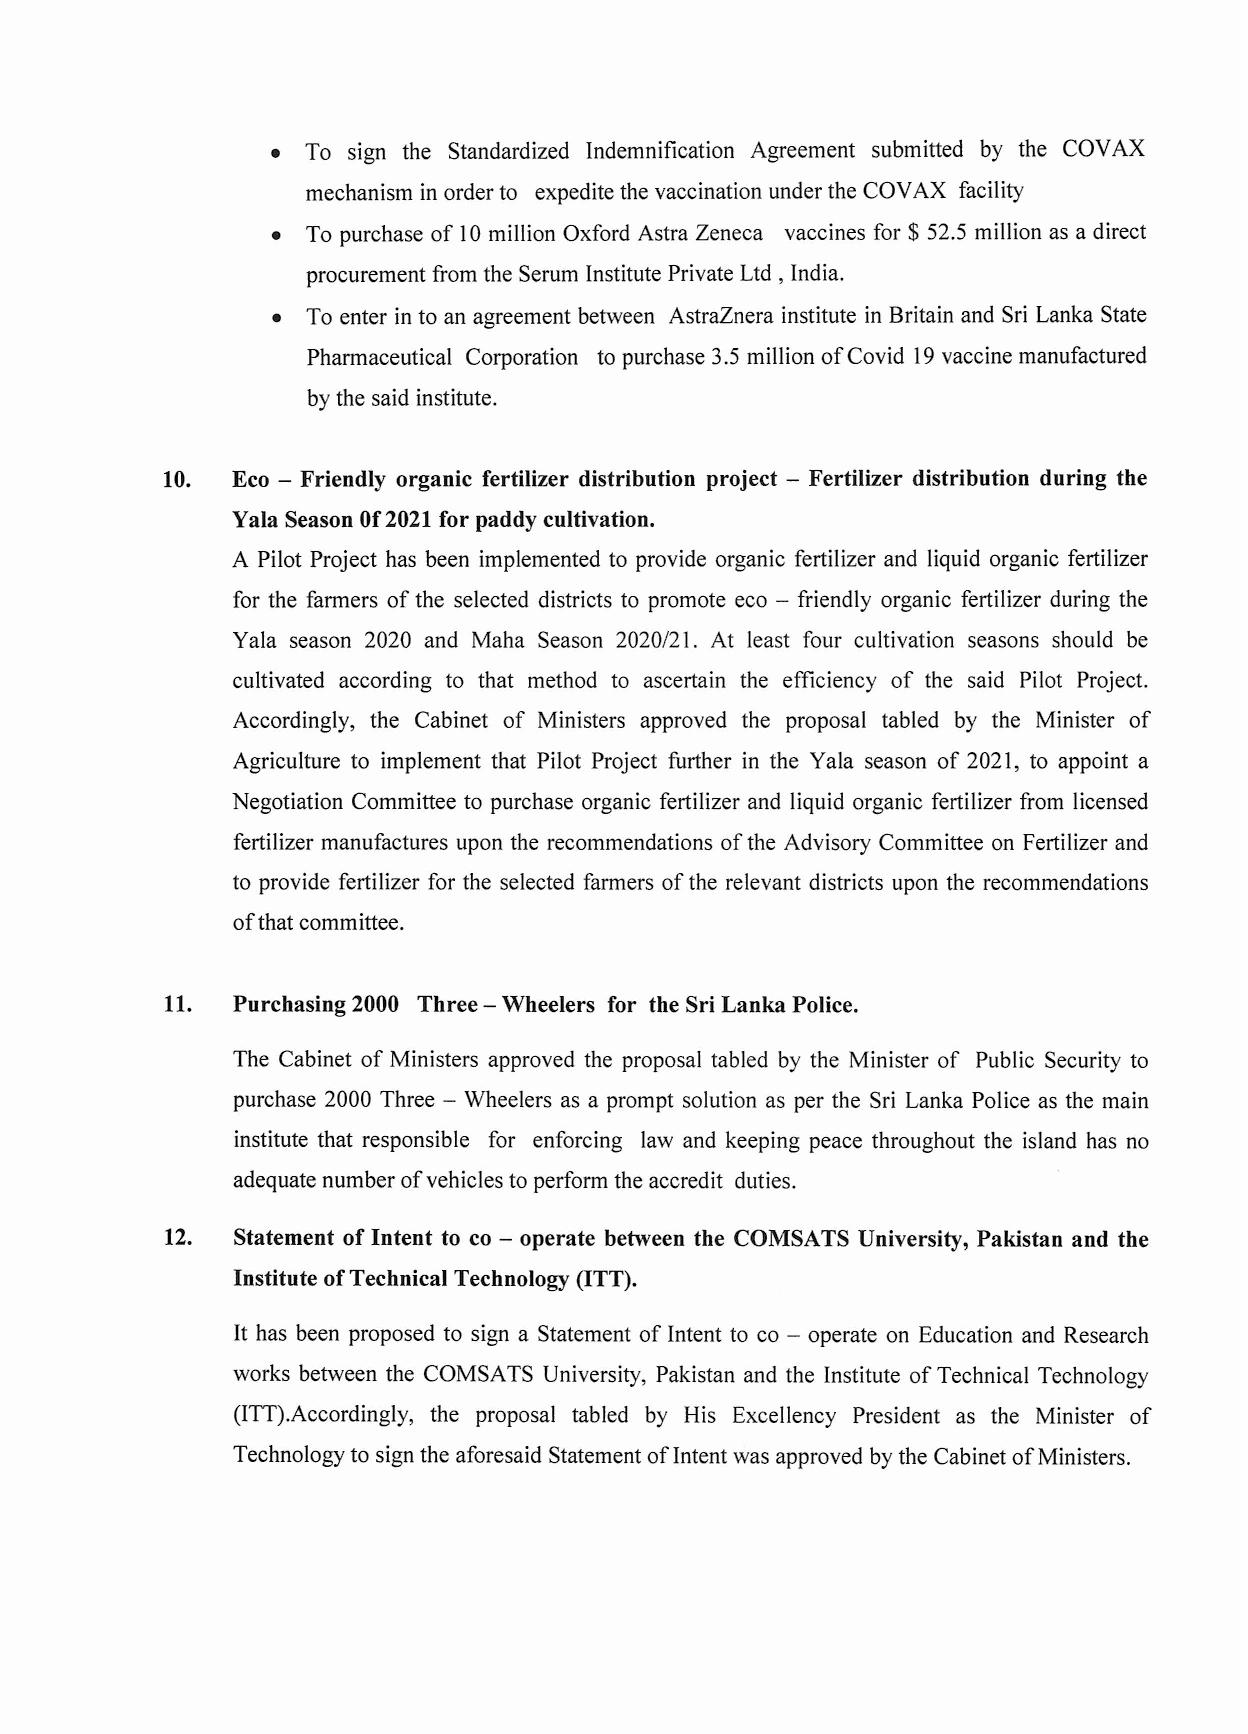 Cabinet Decision on 22.02.2021 Englihs page 004